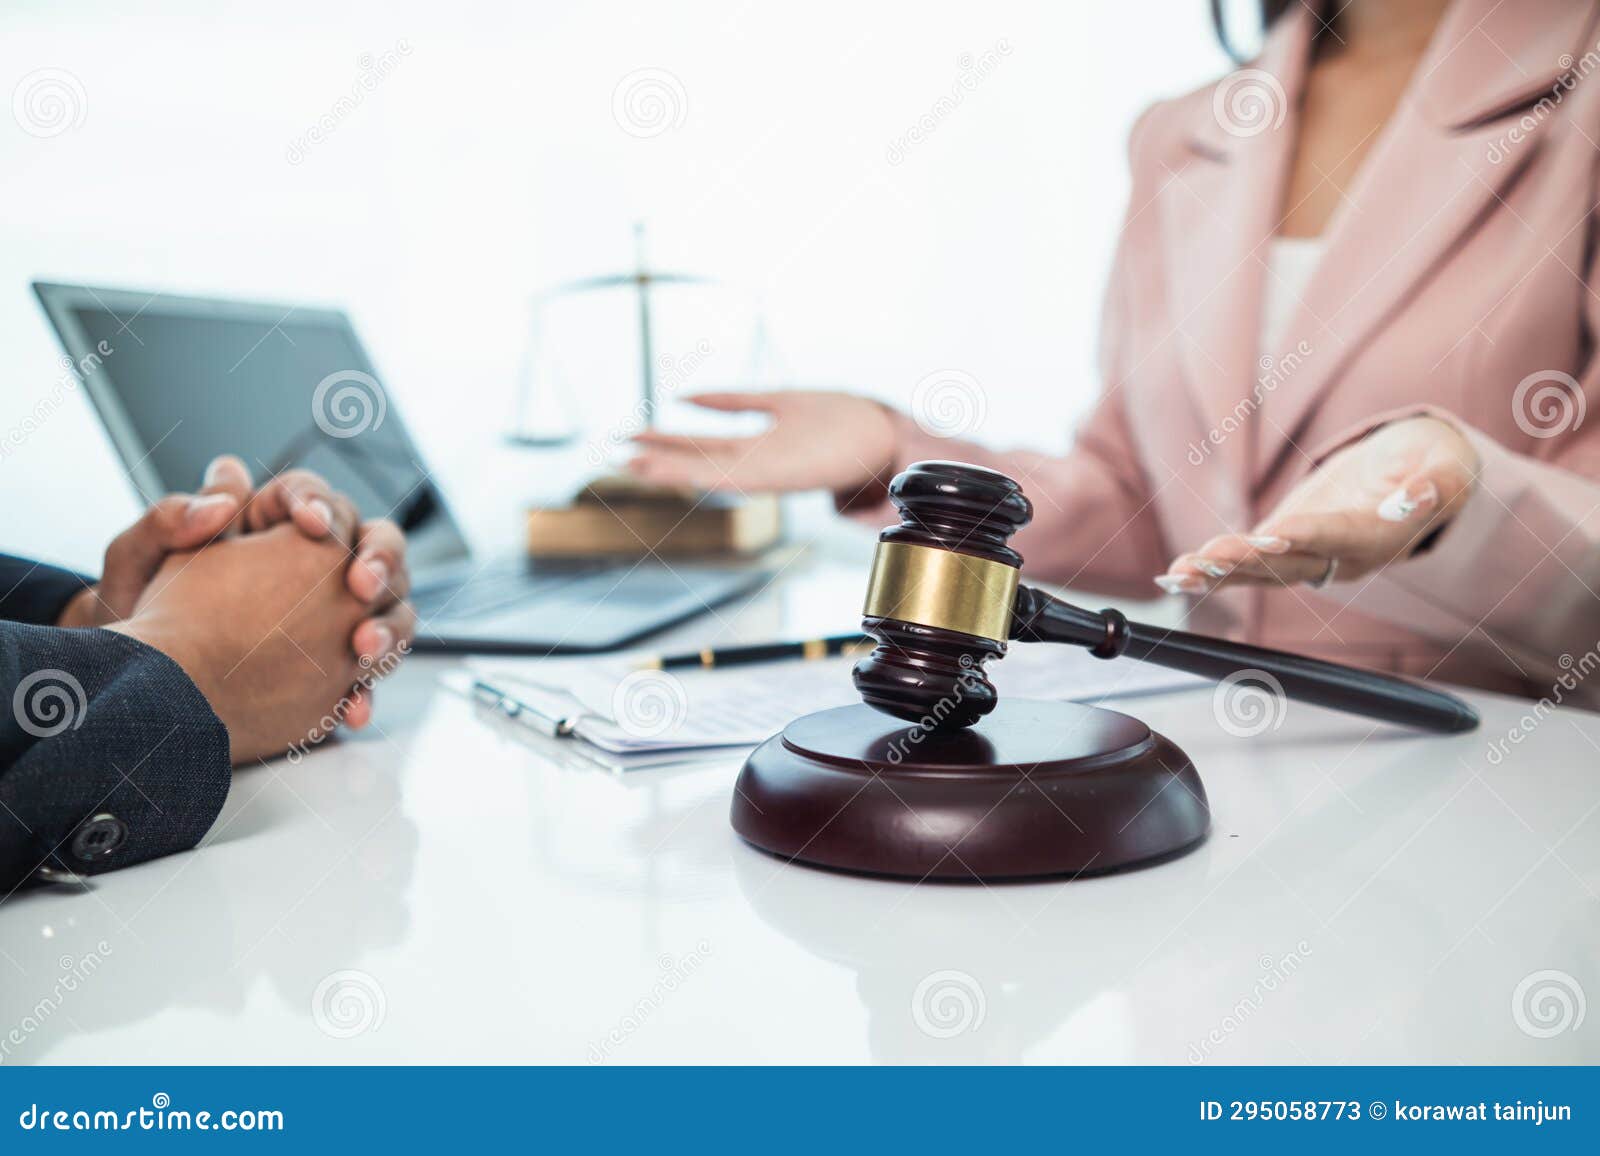 judge gavel in law office is placed on table to ize judge deciding lawsuit. gavel wood on wooden table of lawyers in lega